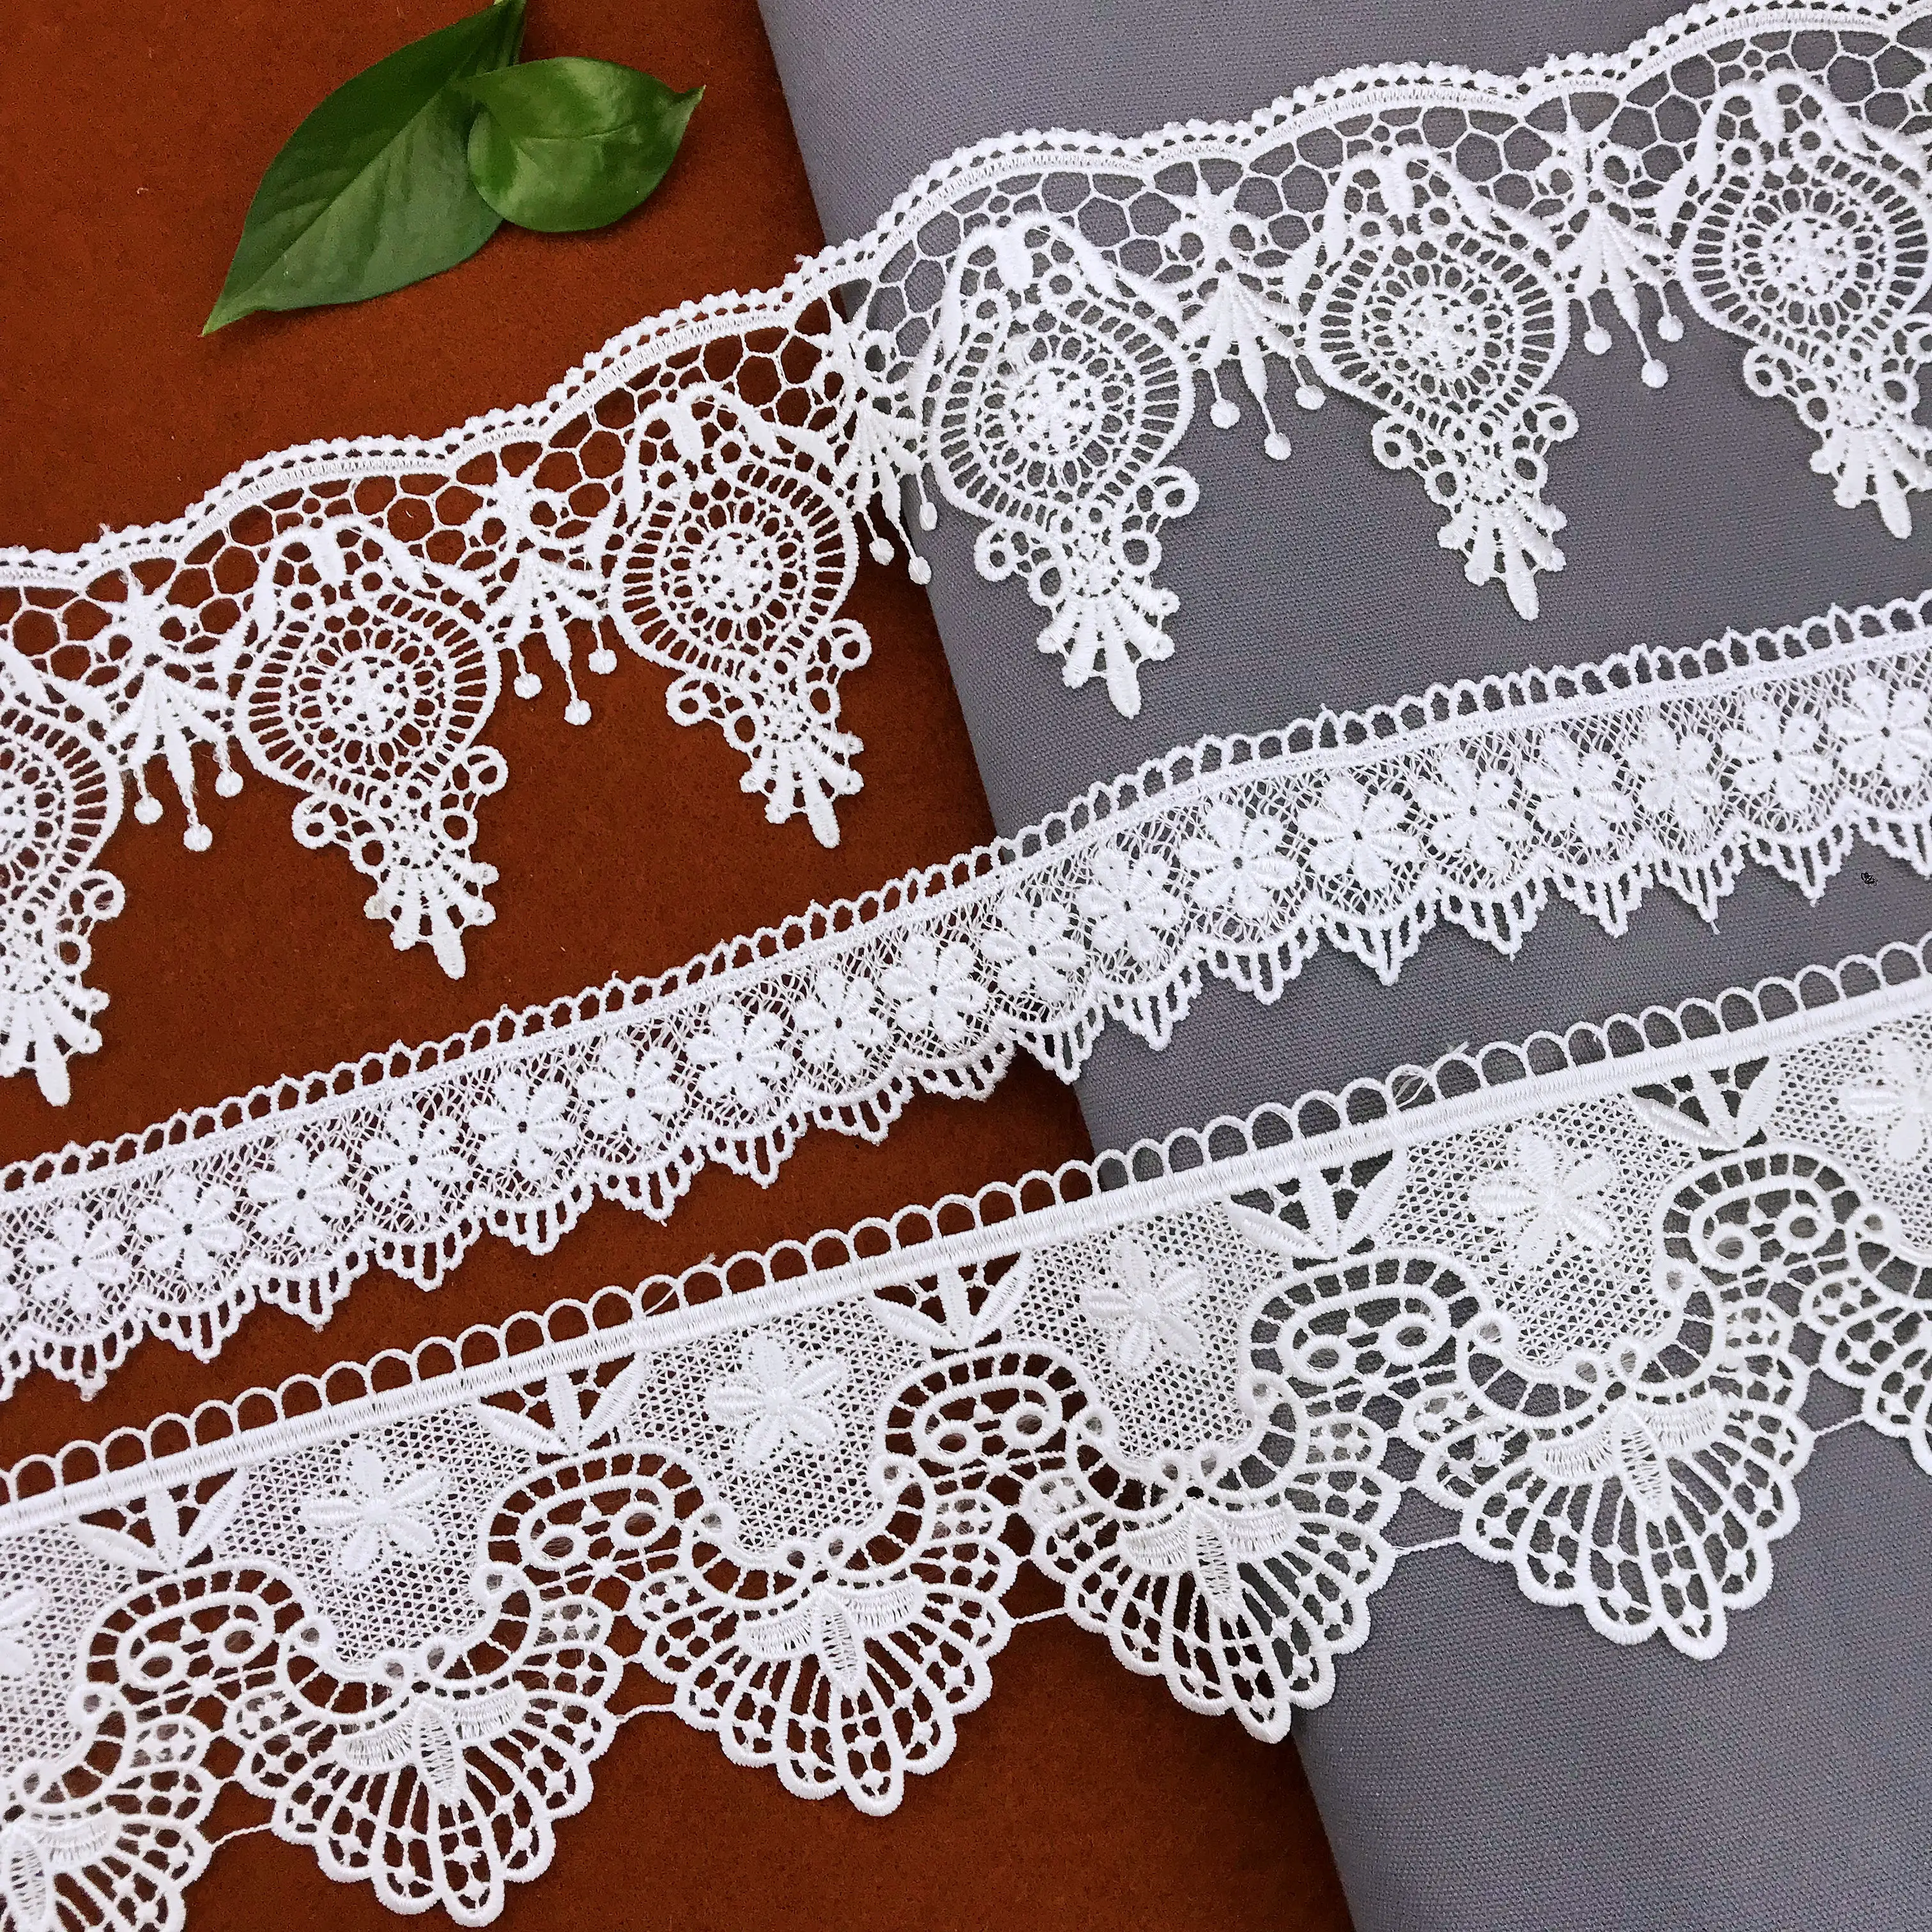 Handmade Dress Sewing Material flower lace fabric New Stylish french lace net fabric